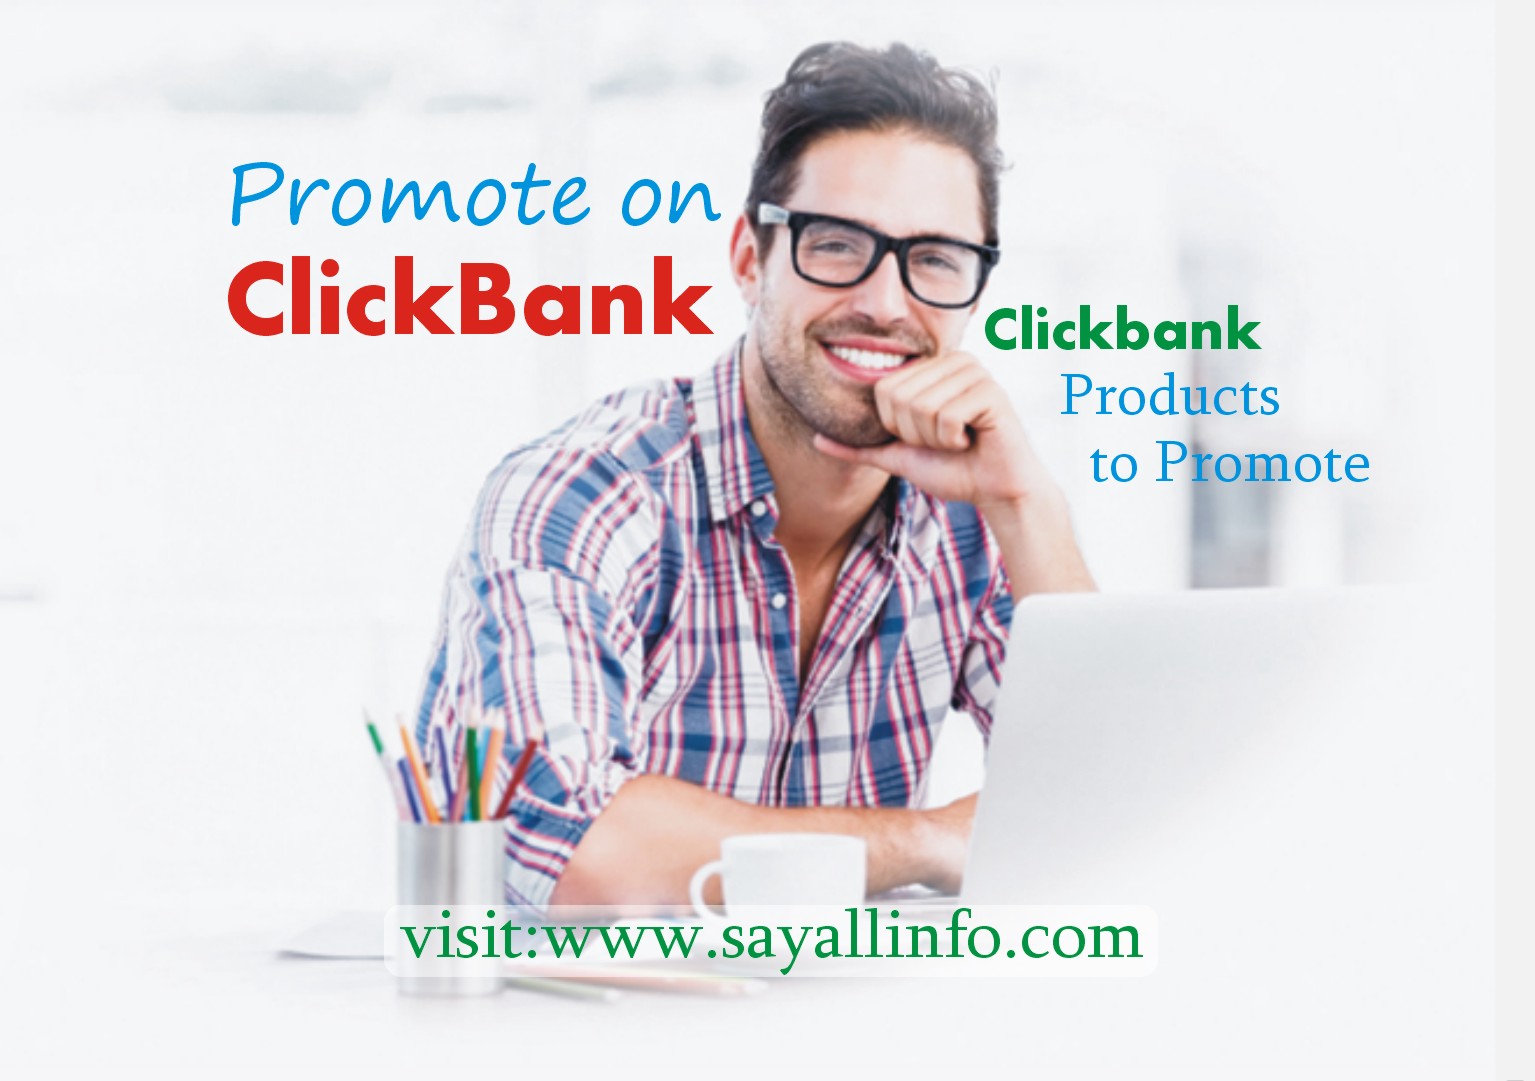 Promote on ClickBank